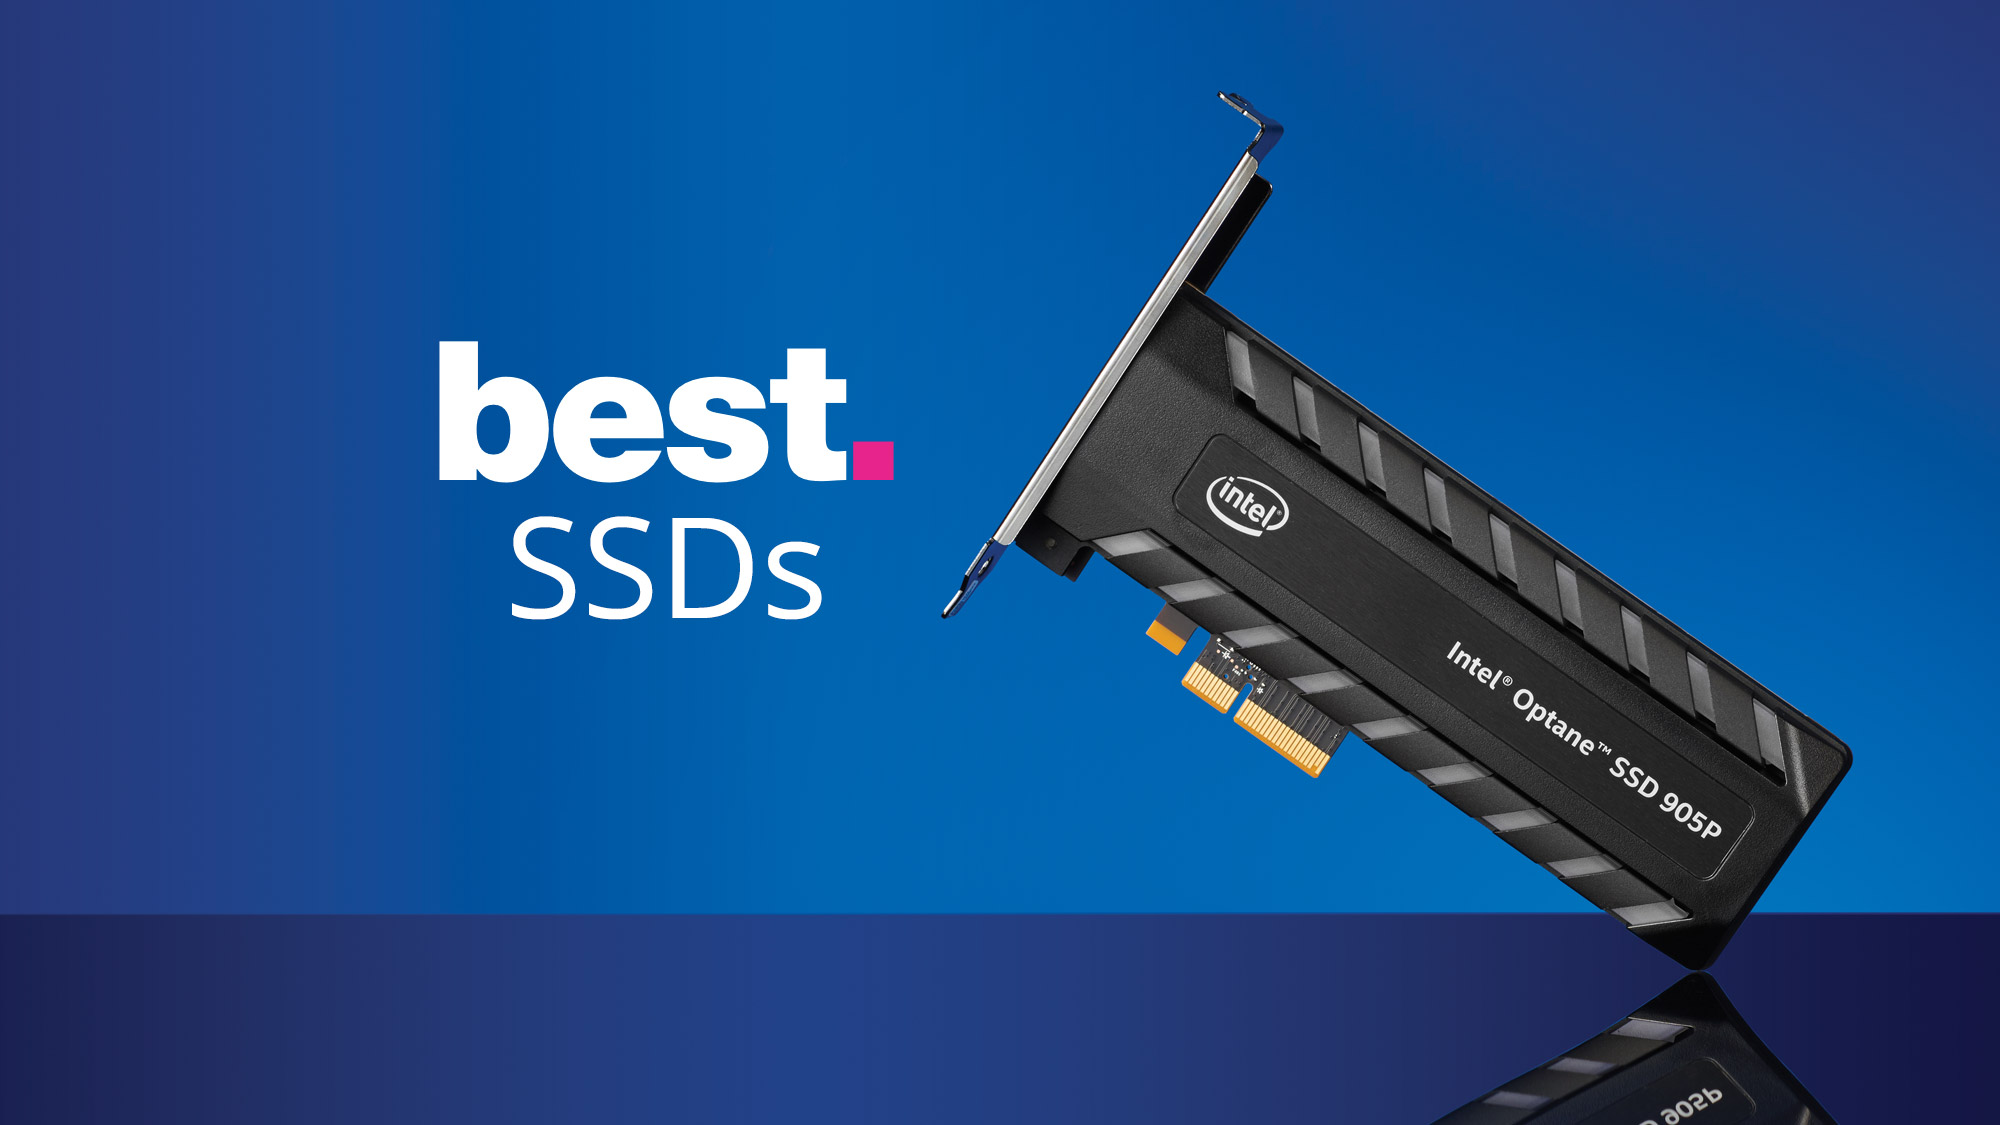 Best SSD for under $200